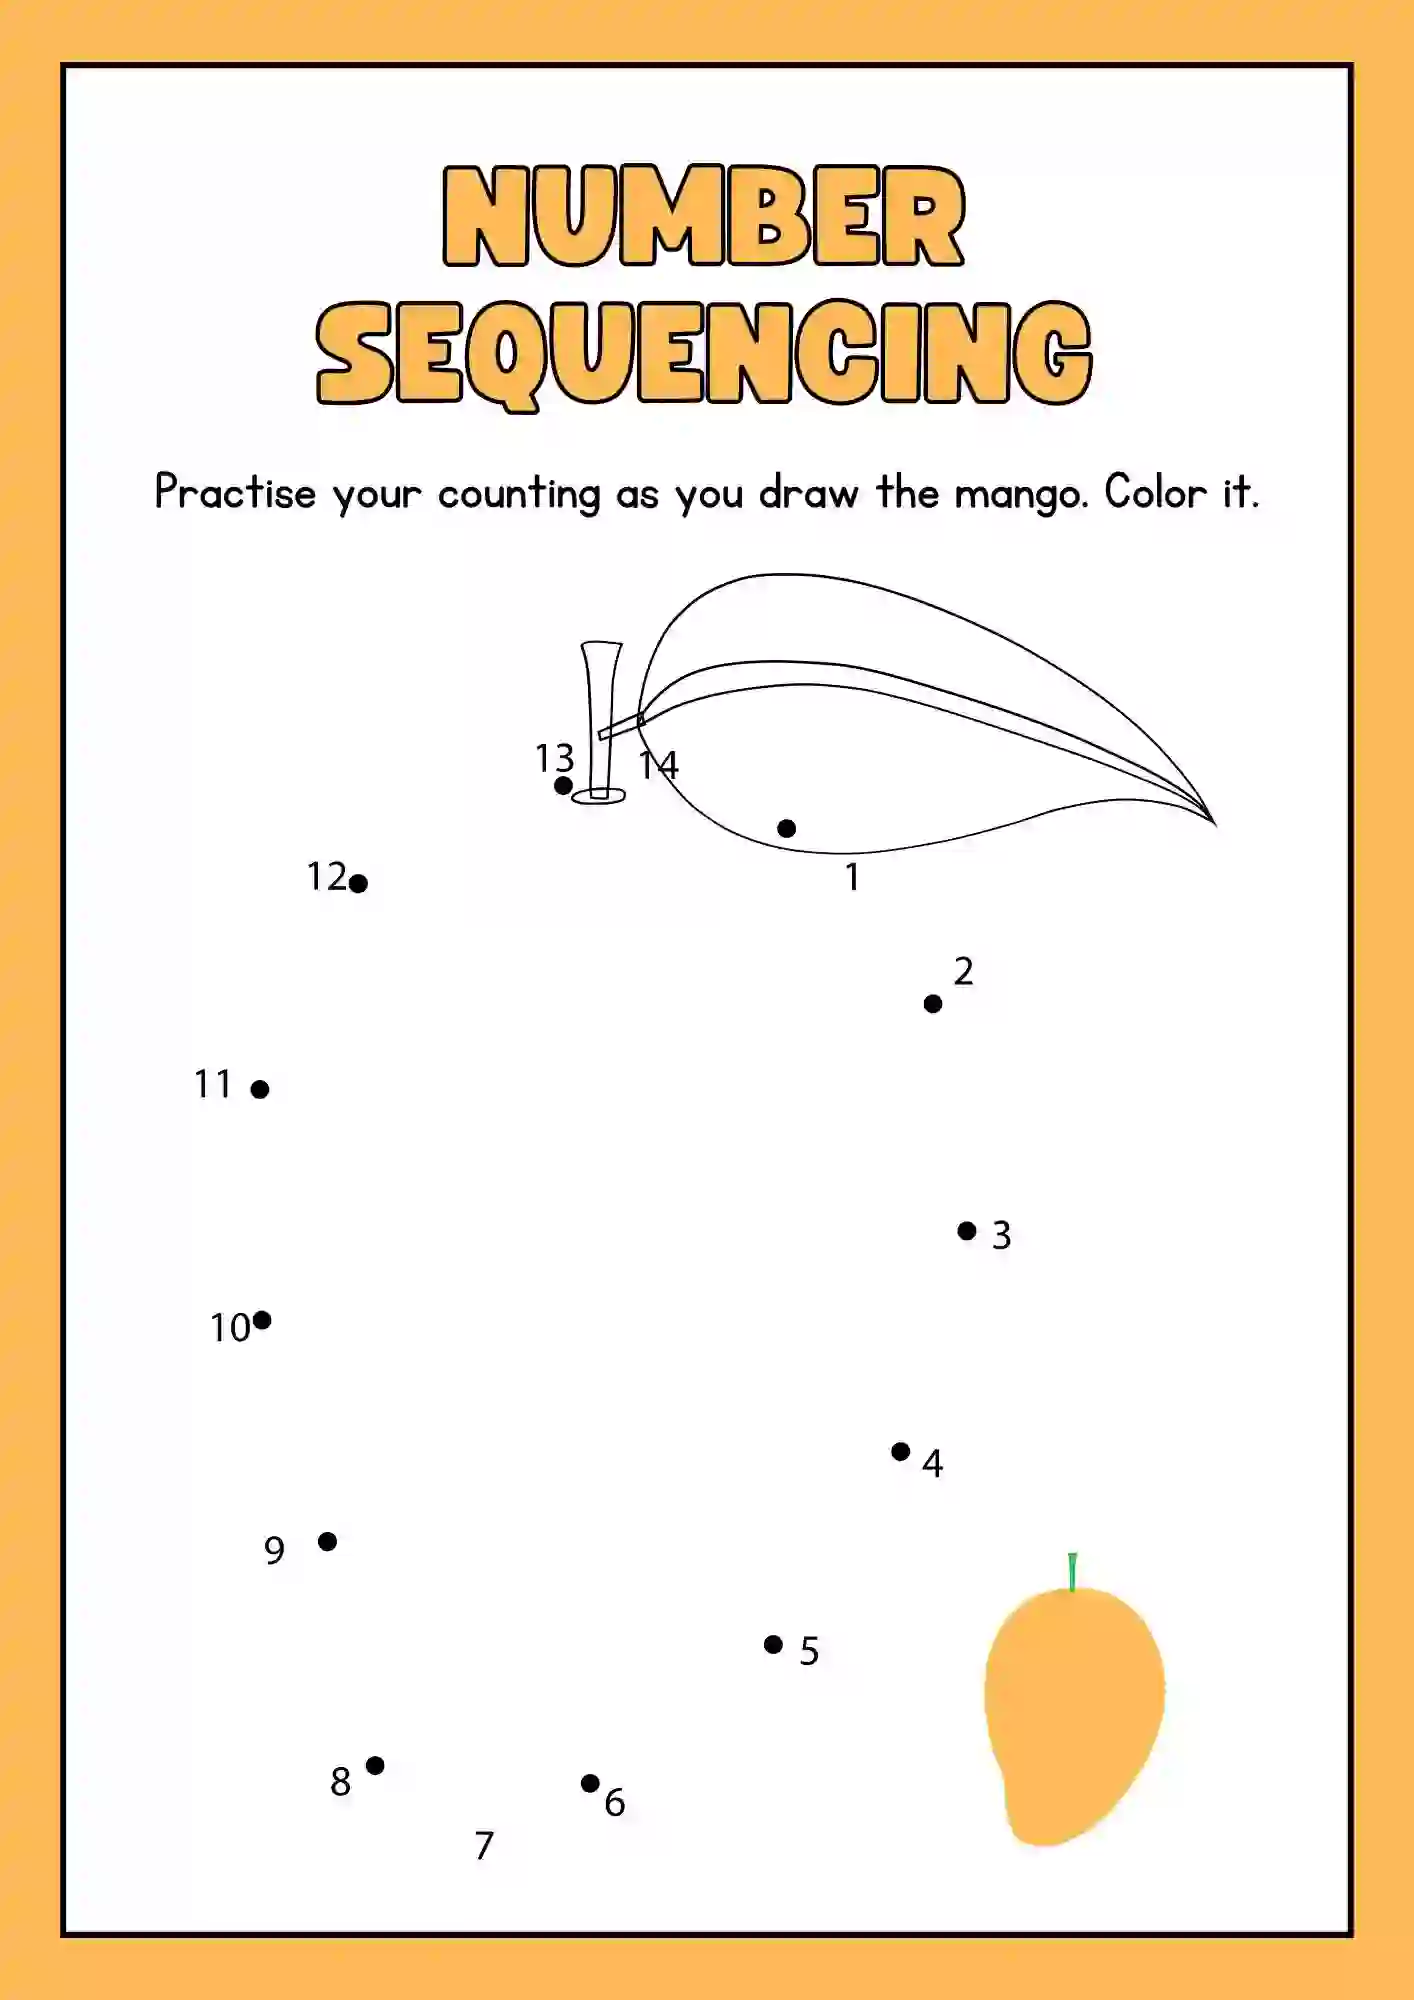 Number Sequencing Activity Worksheet trace and color the (mango)